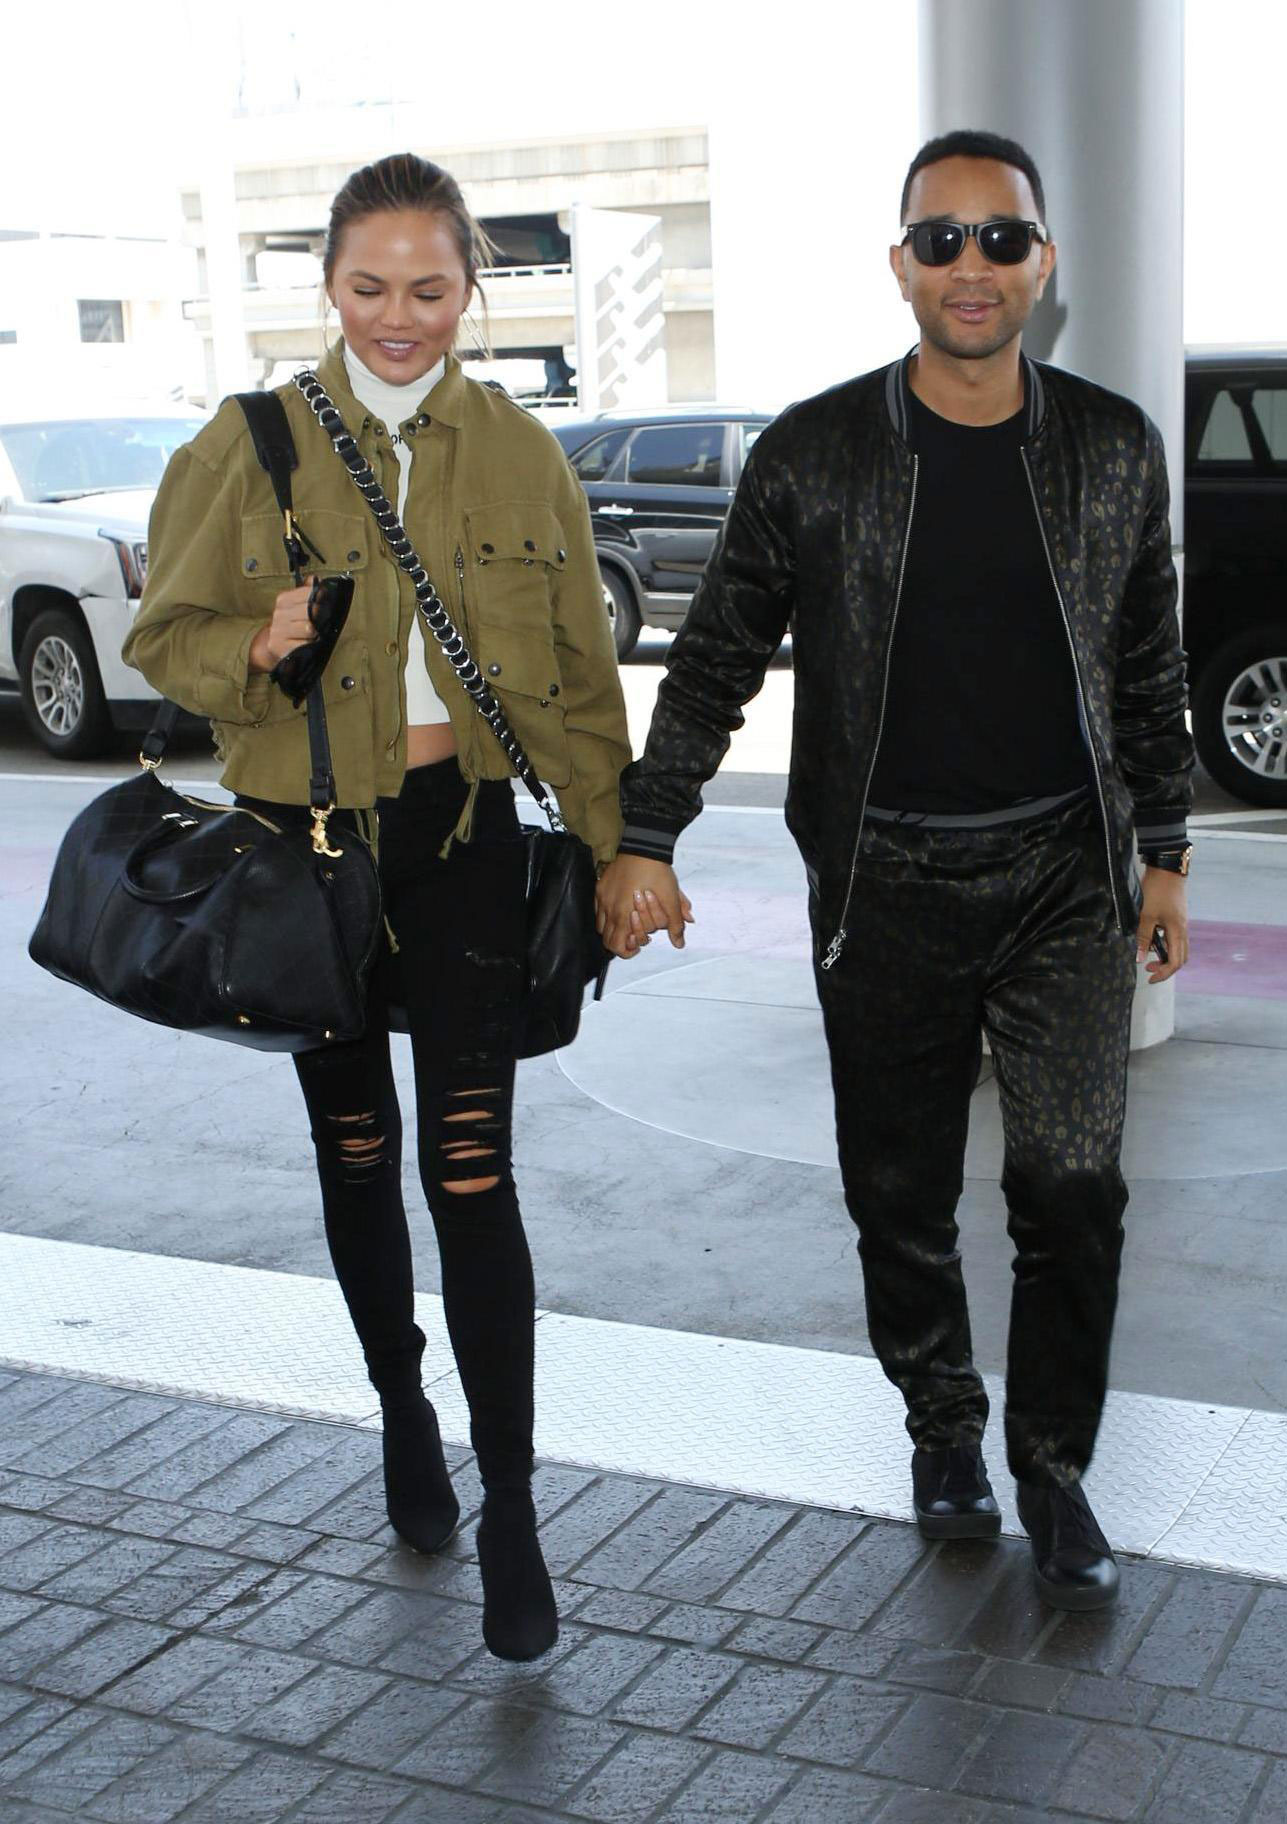 Chrissy Teigen wears a utility jacket with black ripped skinny jeans and ankle boots.